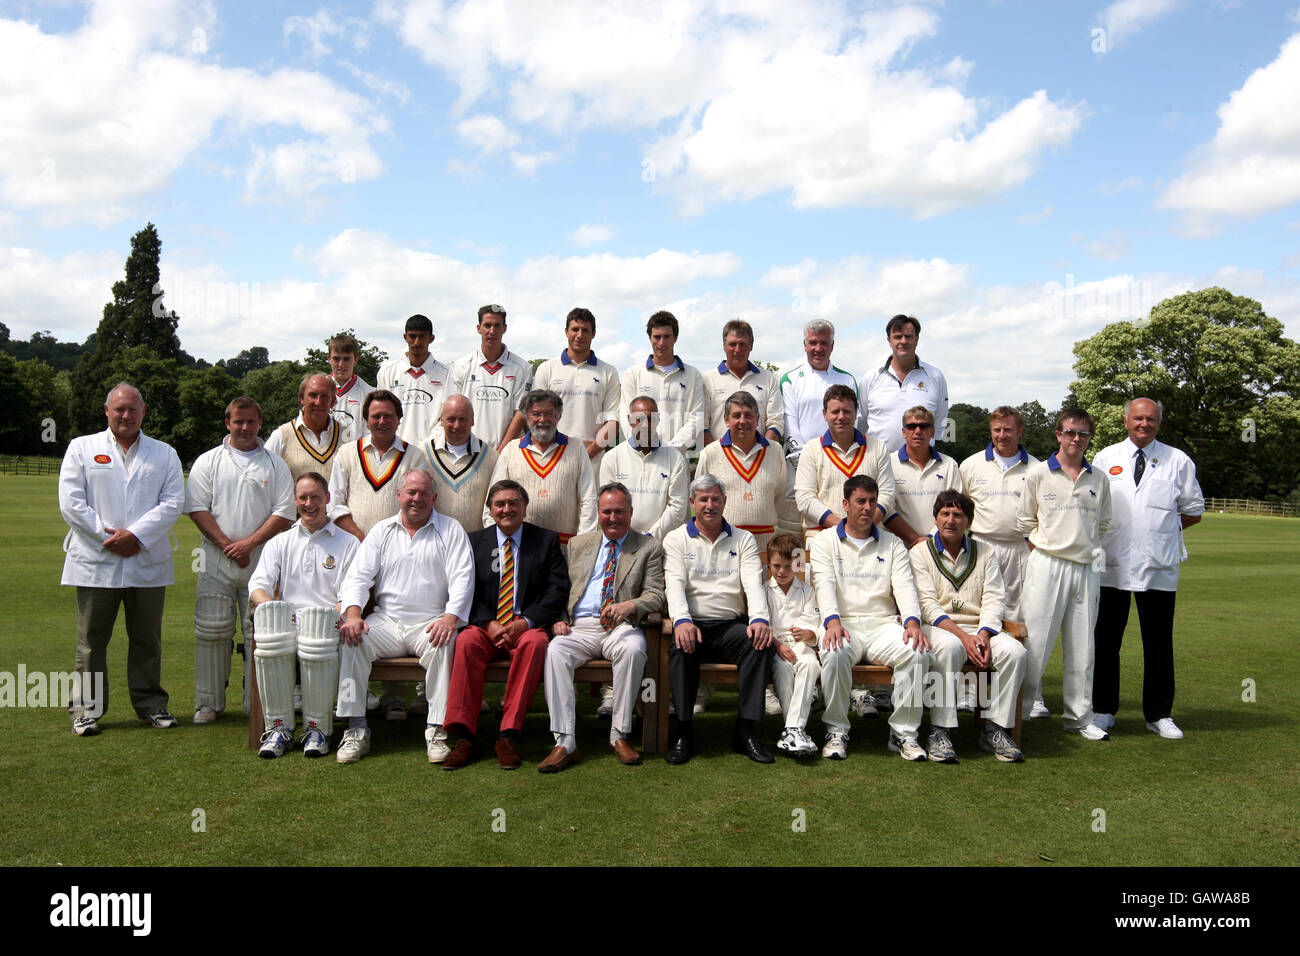 The Duke of Rutland XI and the Sir Richard Hadlee XI team's group together for a team photo before the start of the charity match Stock Photo